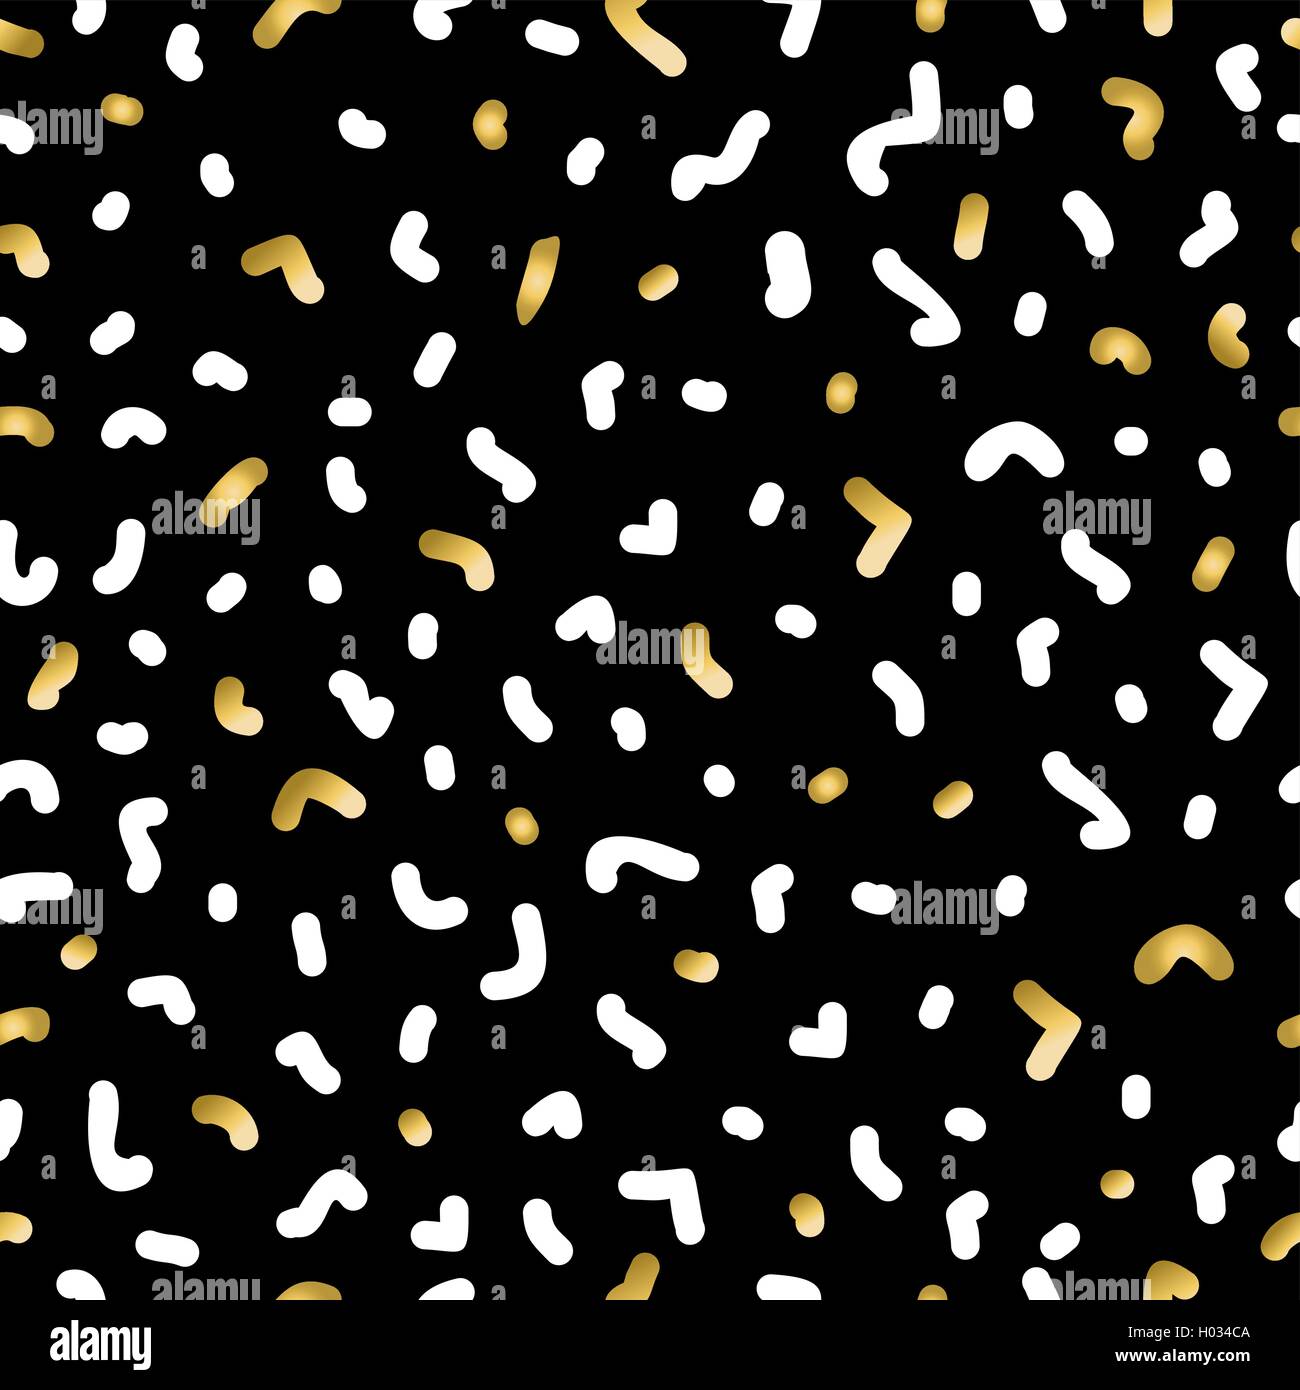 Gold color retro seamless pattern with abstract shapes in 80s memphis fashion style. EPS10 vector. Stock Vector